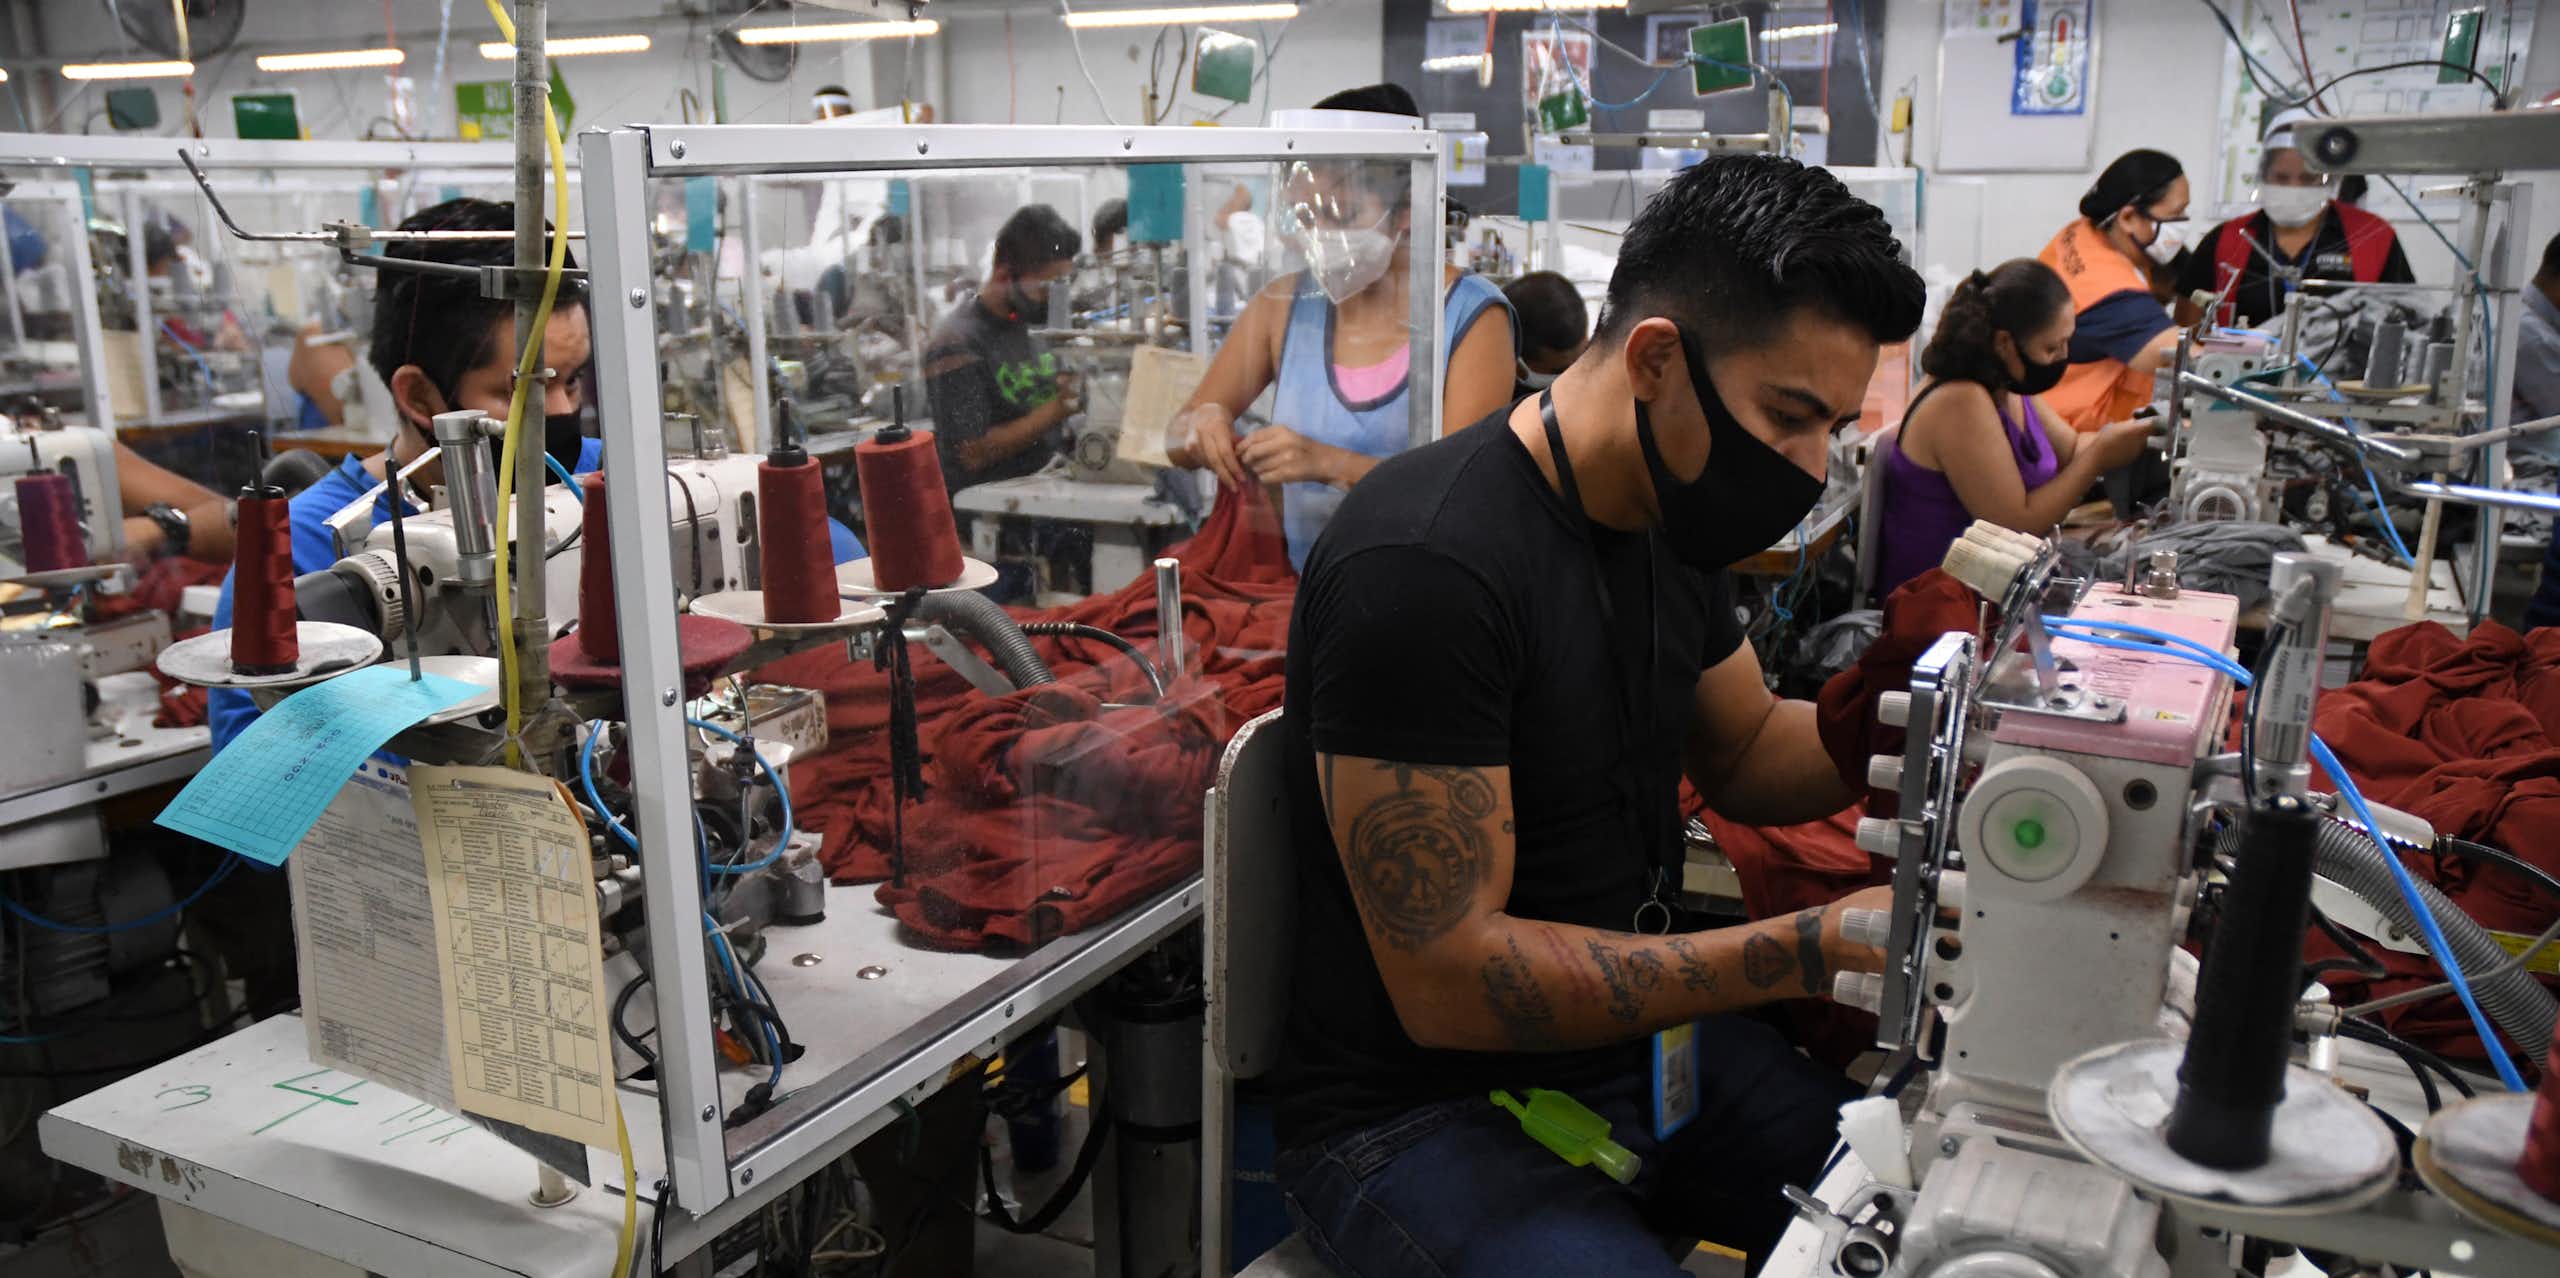 Workers in face masks sit next to sewing machines.